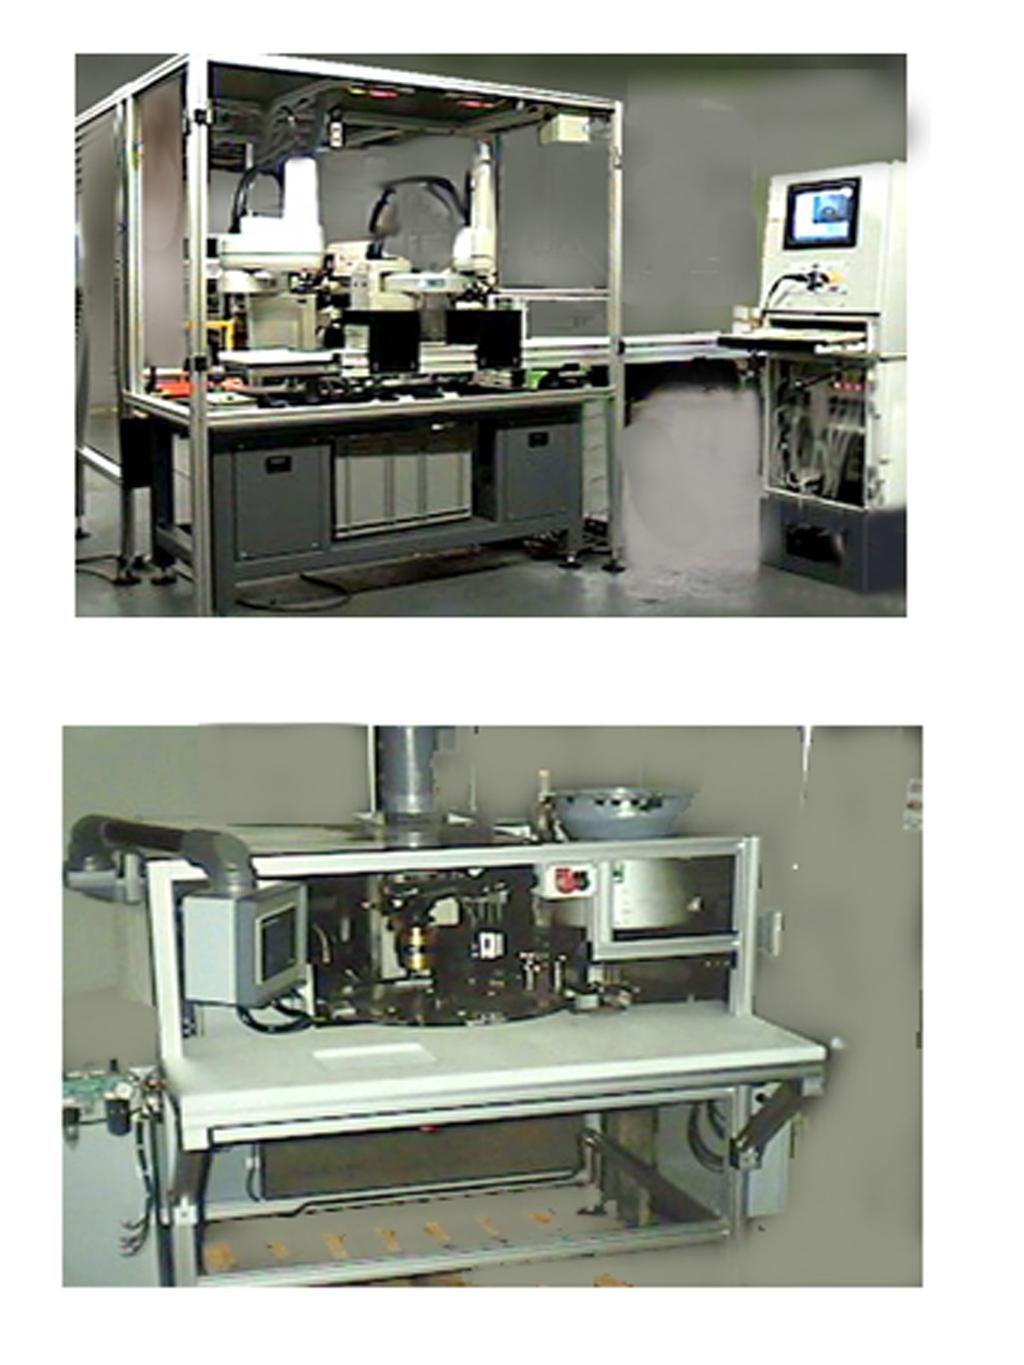 Bay Automation, Inc. Robotic Inspection Cell The Inspection Cell was developed for inspection and singular placement of stacked parts.